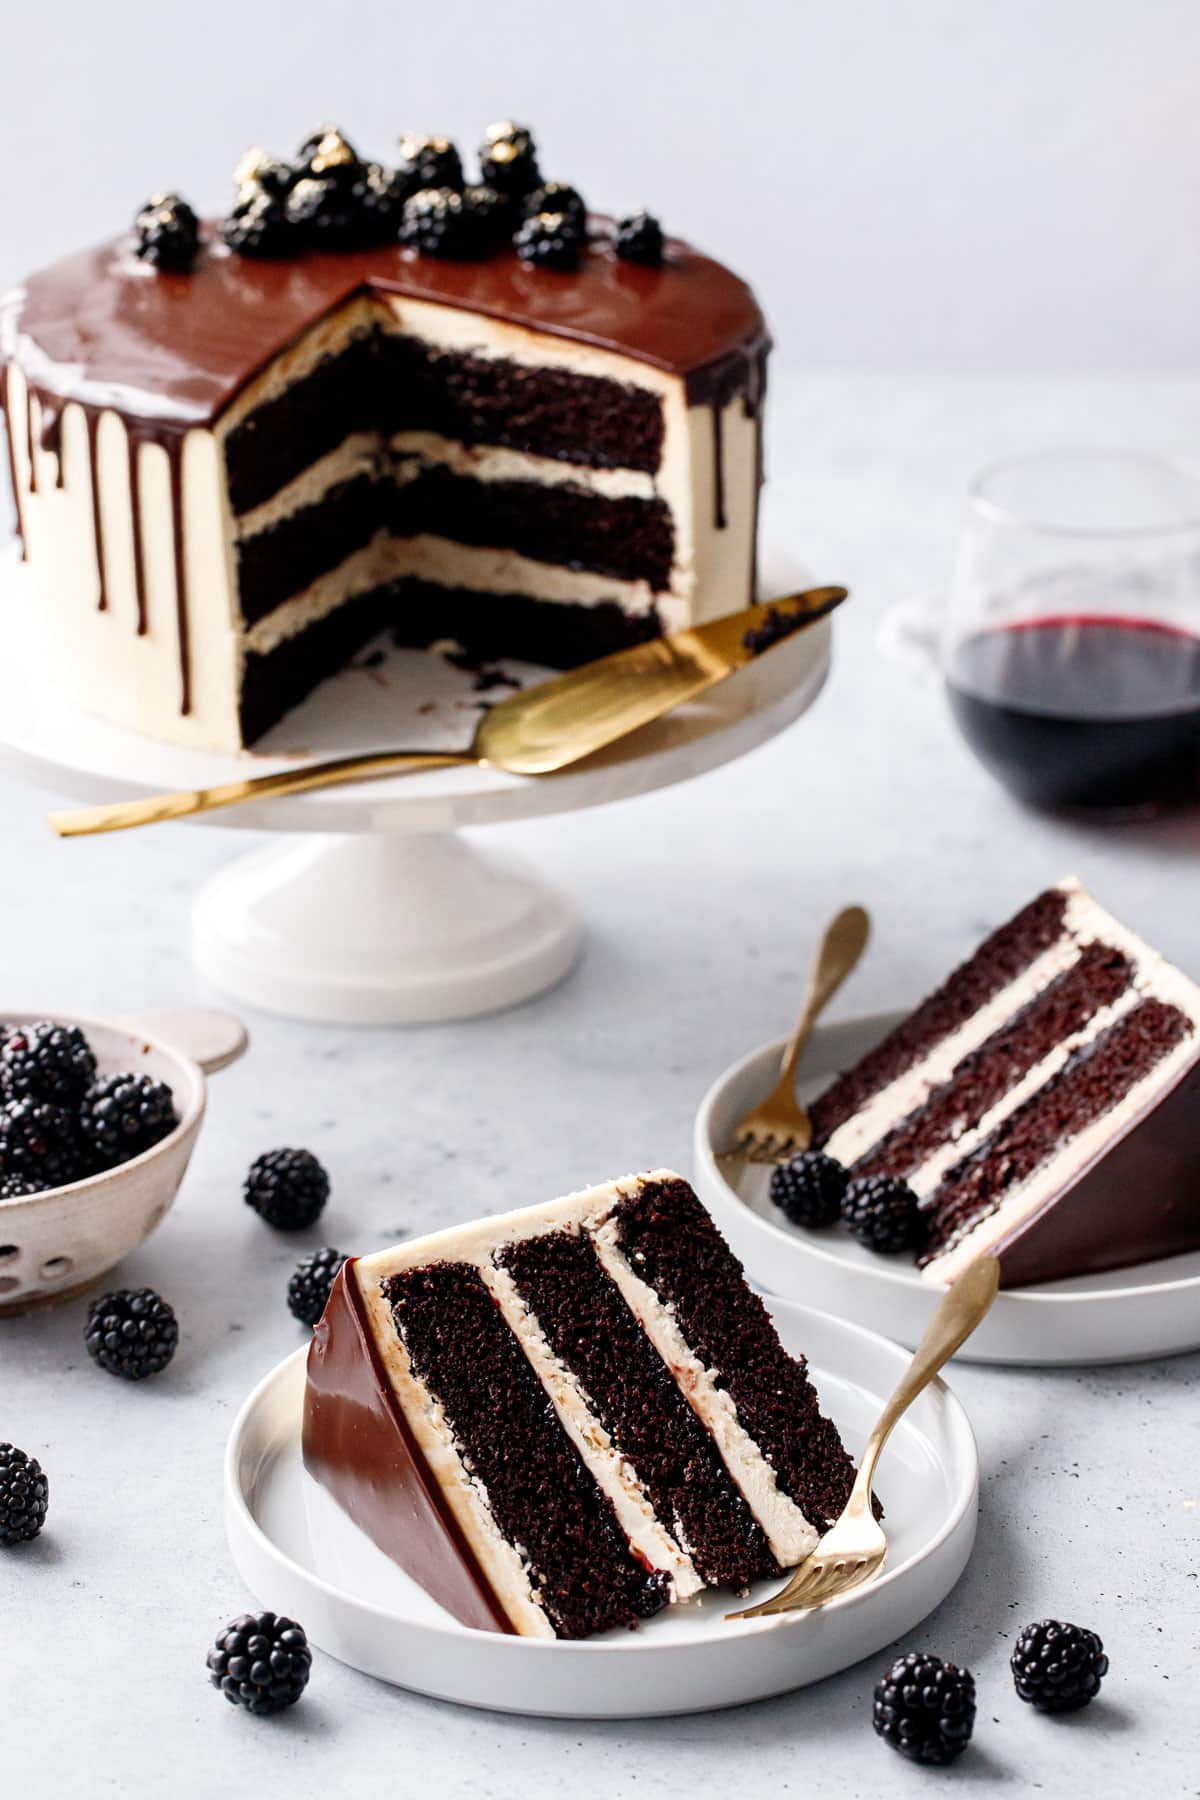 Slices of Blackberry Red Wine Chocolate Cake on white plates, whole cake with a gold cake server, glass of red wine, and fresh blackberries in the background.